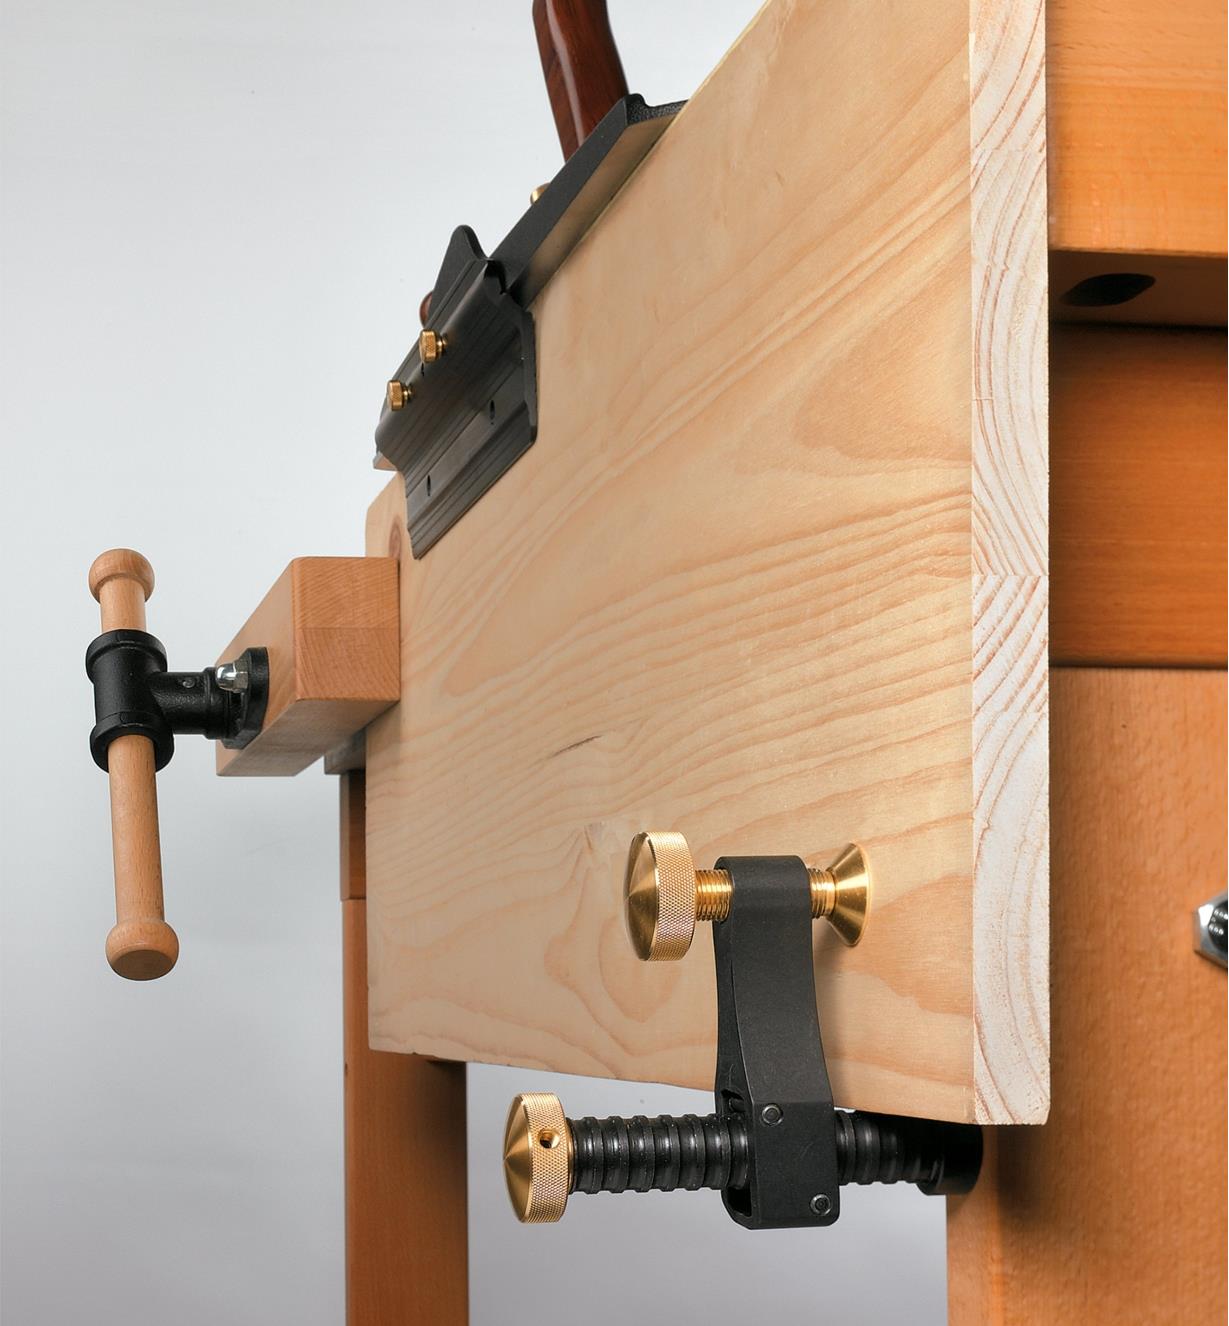 Veritas Surface Clamp securing a board that is being planed